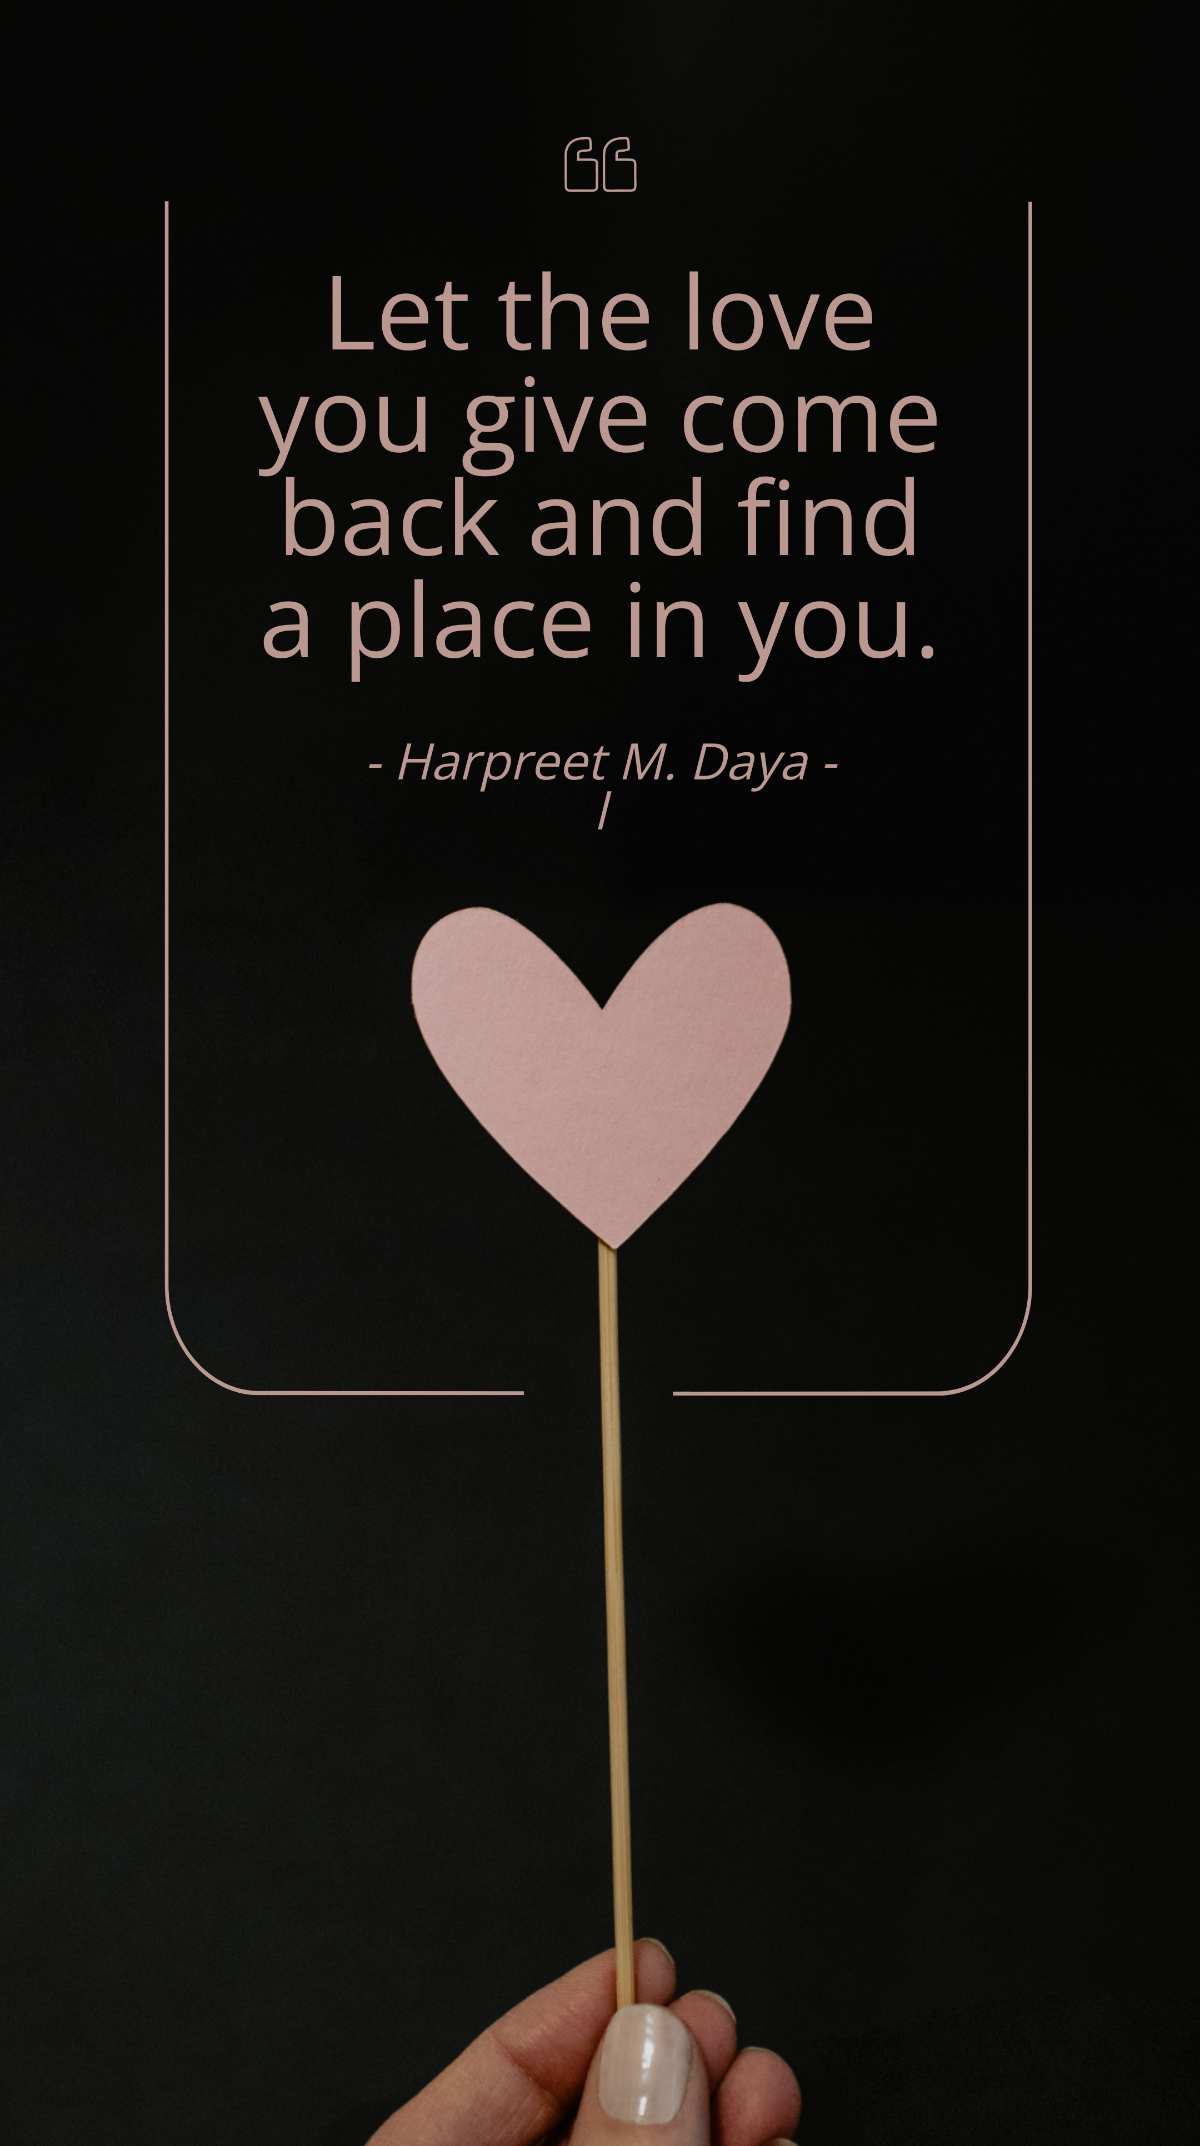 Harpreet M. Dayal - Let the love you give come back and find a place in you.